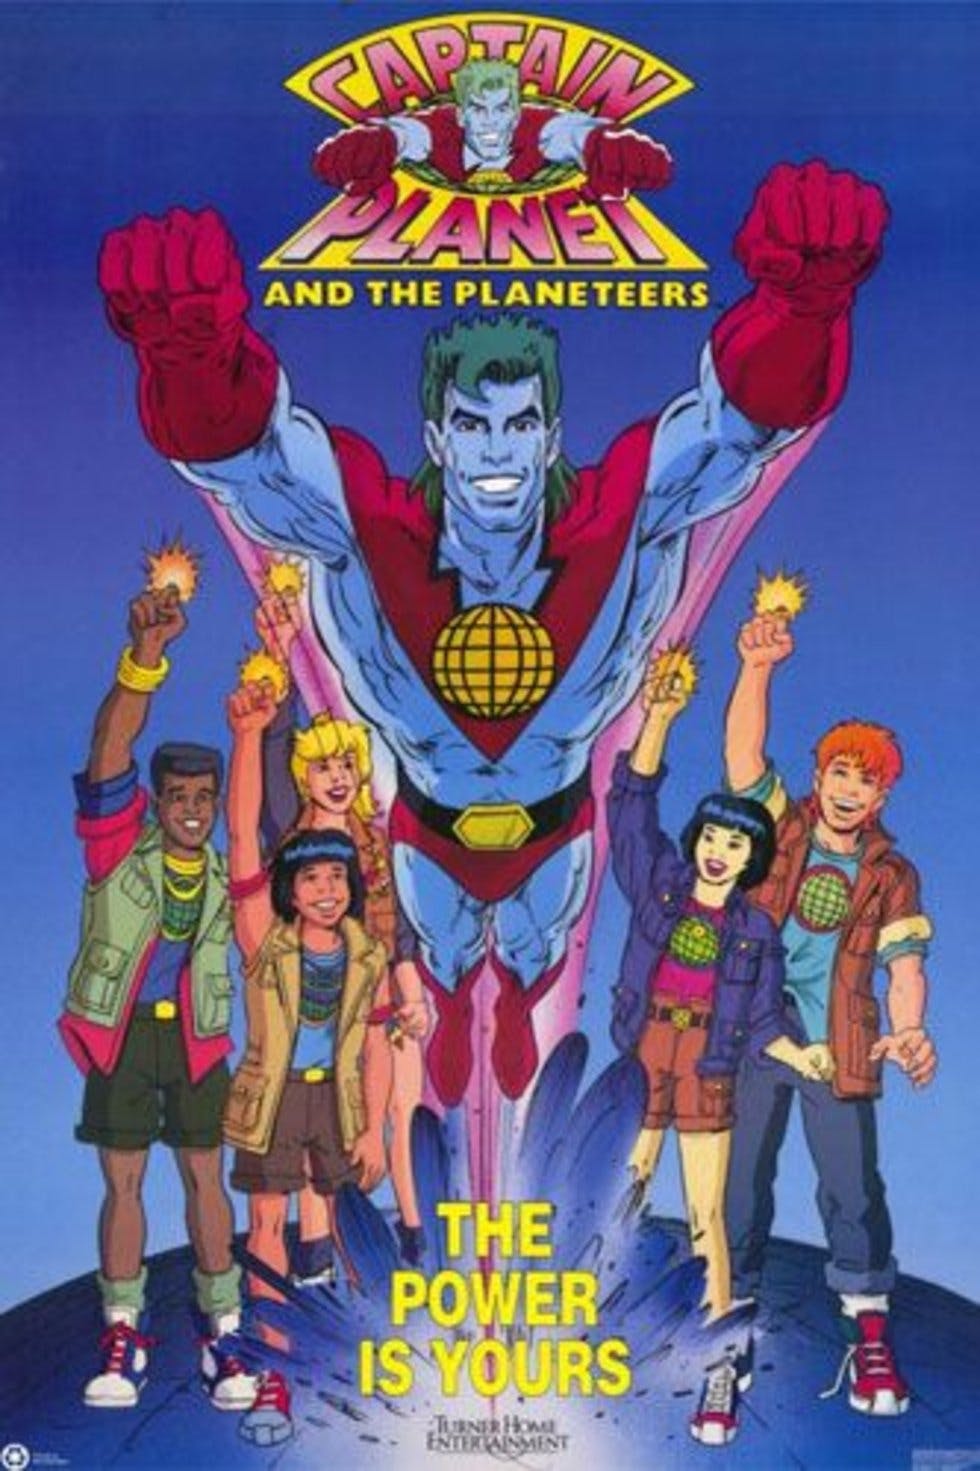 What a Captain Planet Reboot should be: The Planeteers 